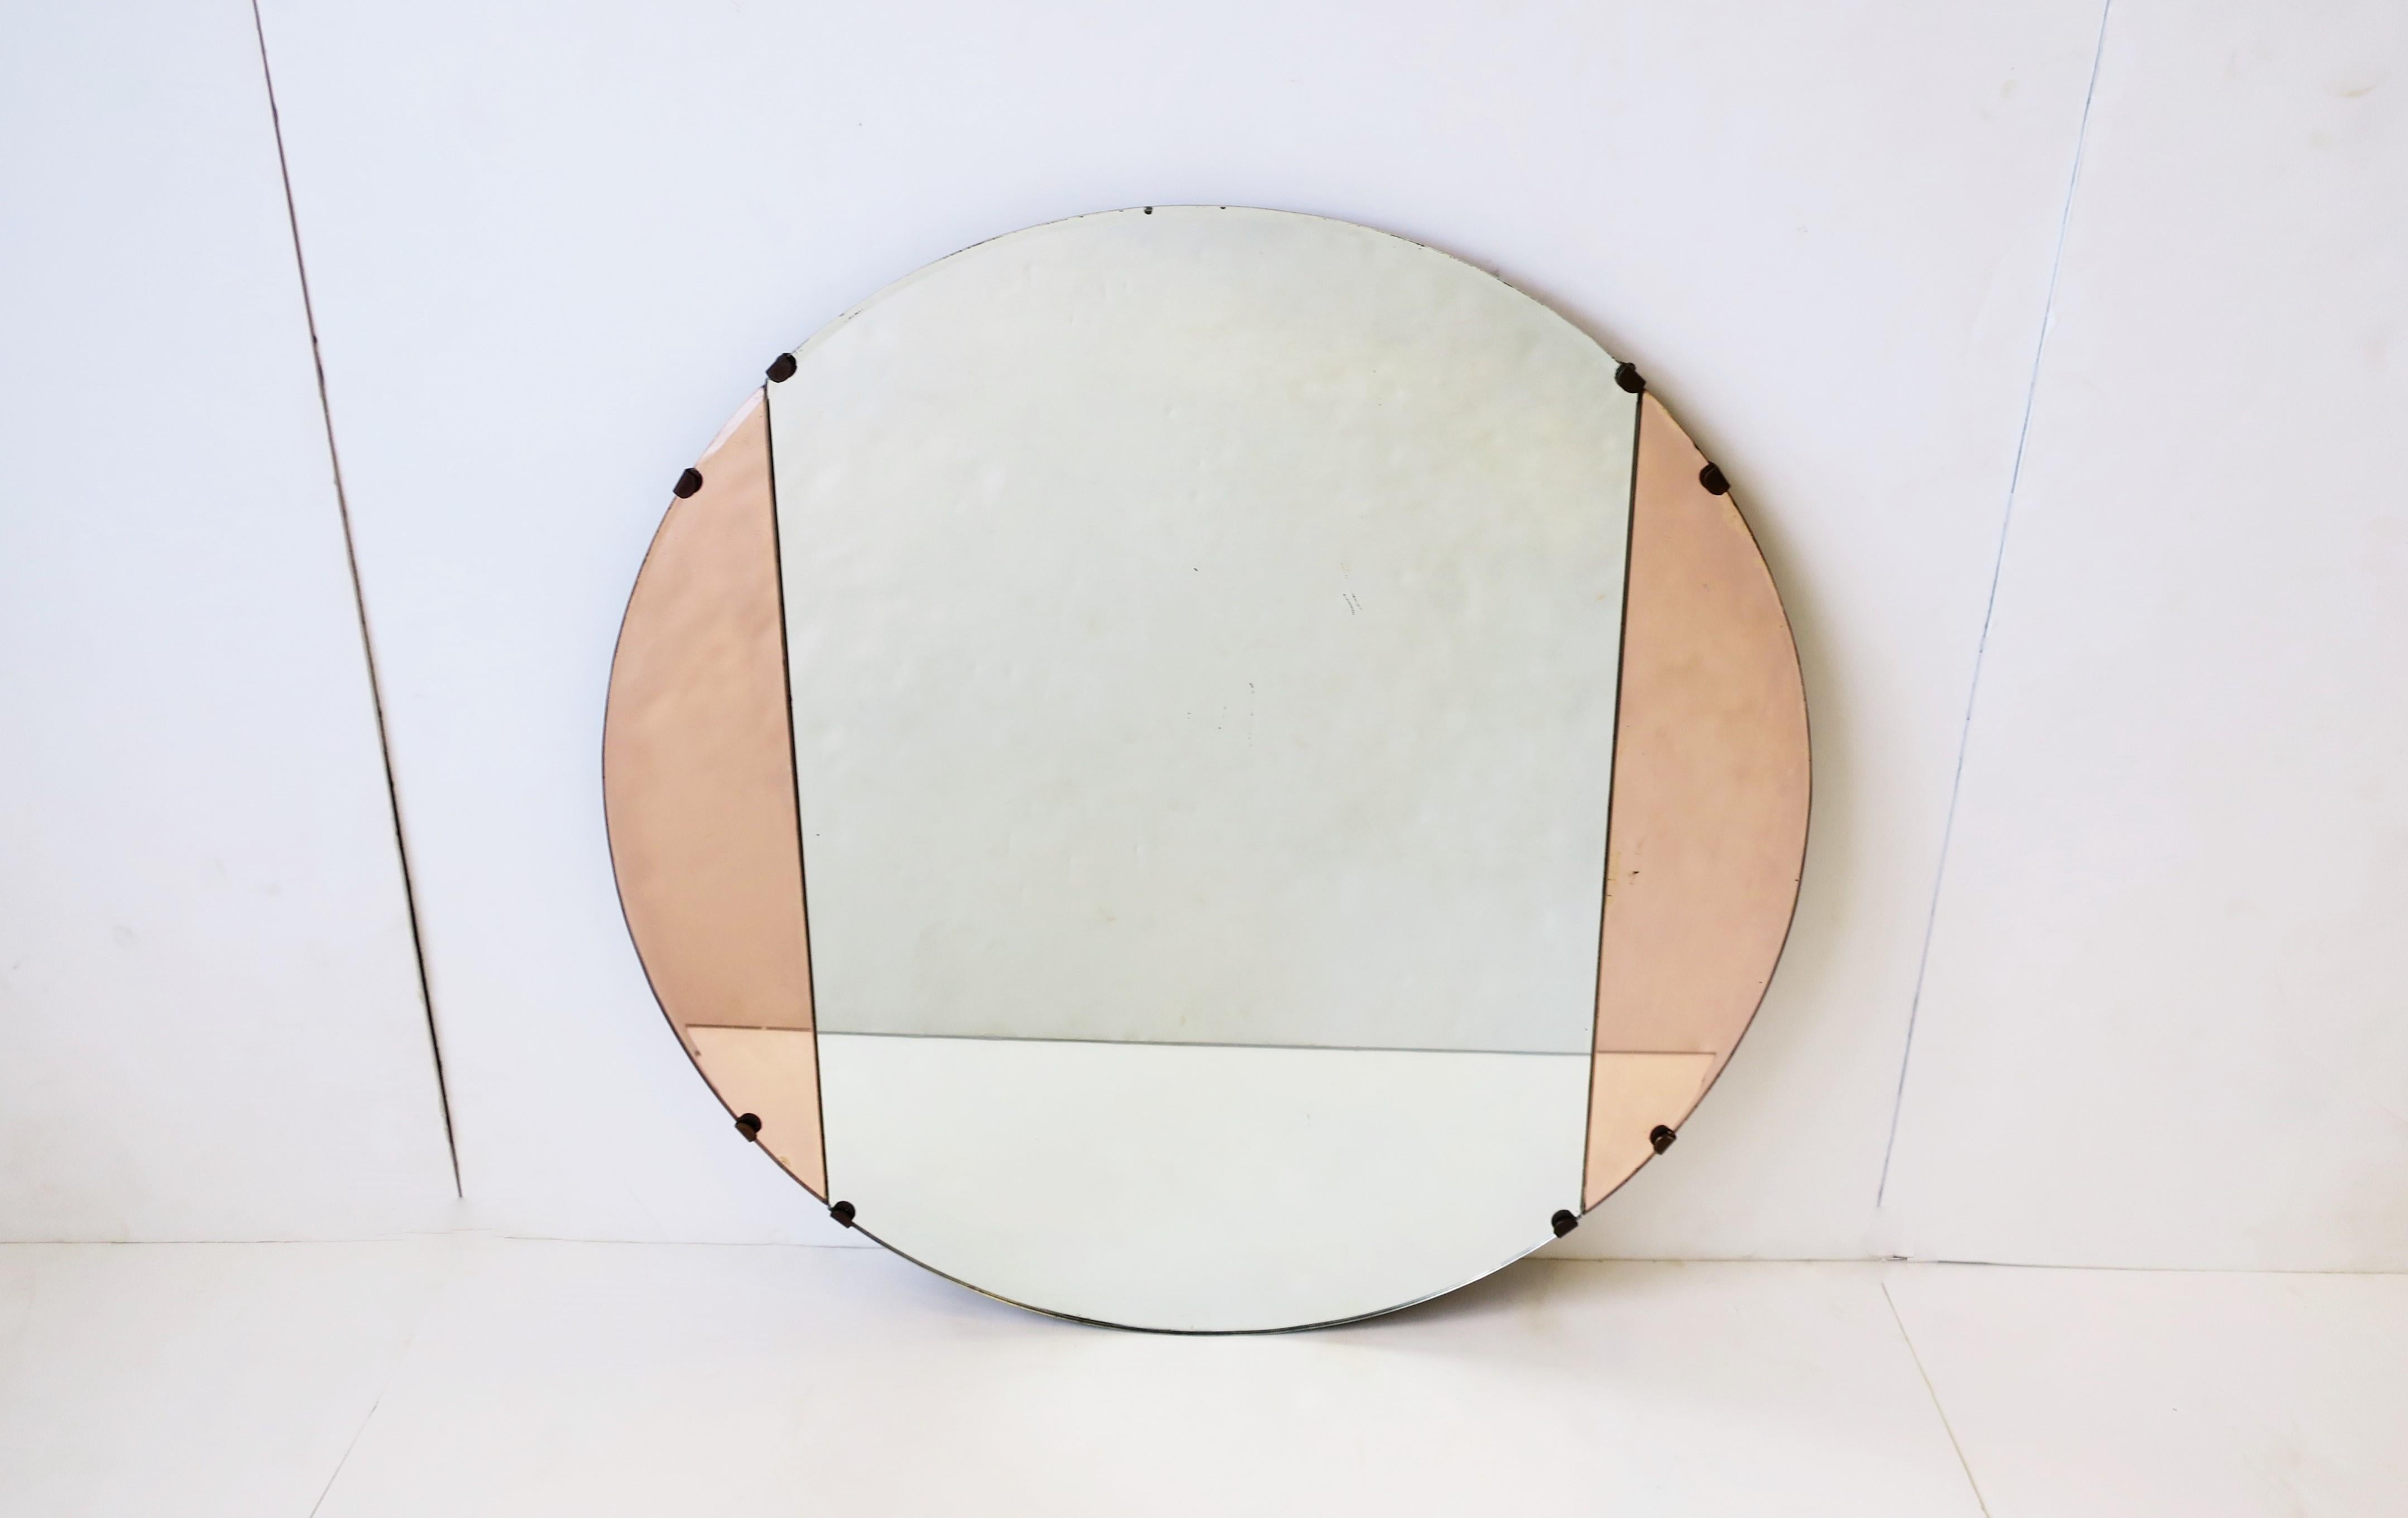 A very beautiful round Art Deco period wall mirror with pink or rose colored mirrored glass, circa 1940s, USA, as marked on back (please see images #10 and 11.) Dimensions: 23.63